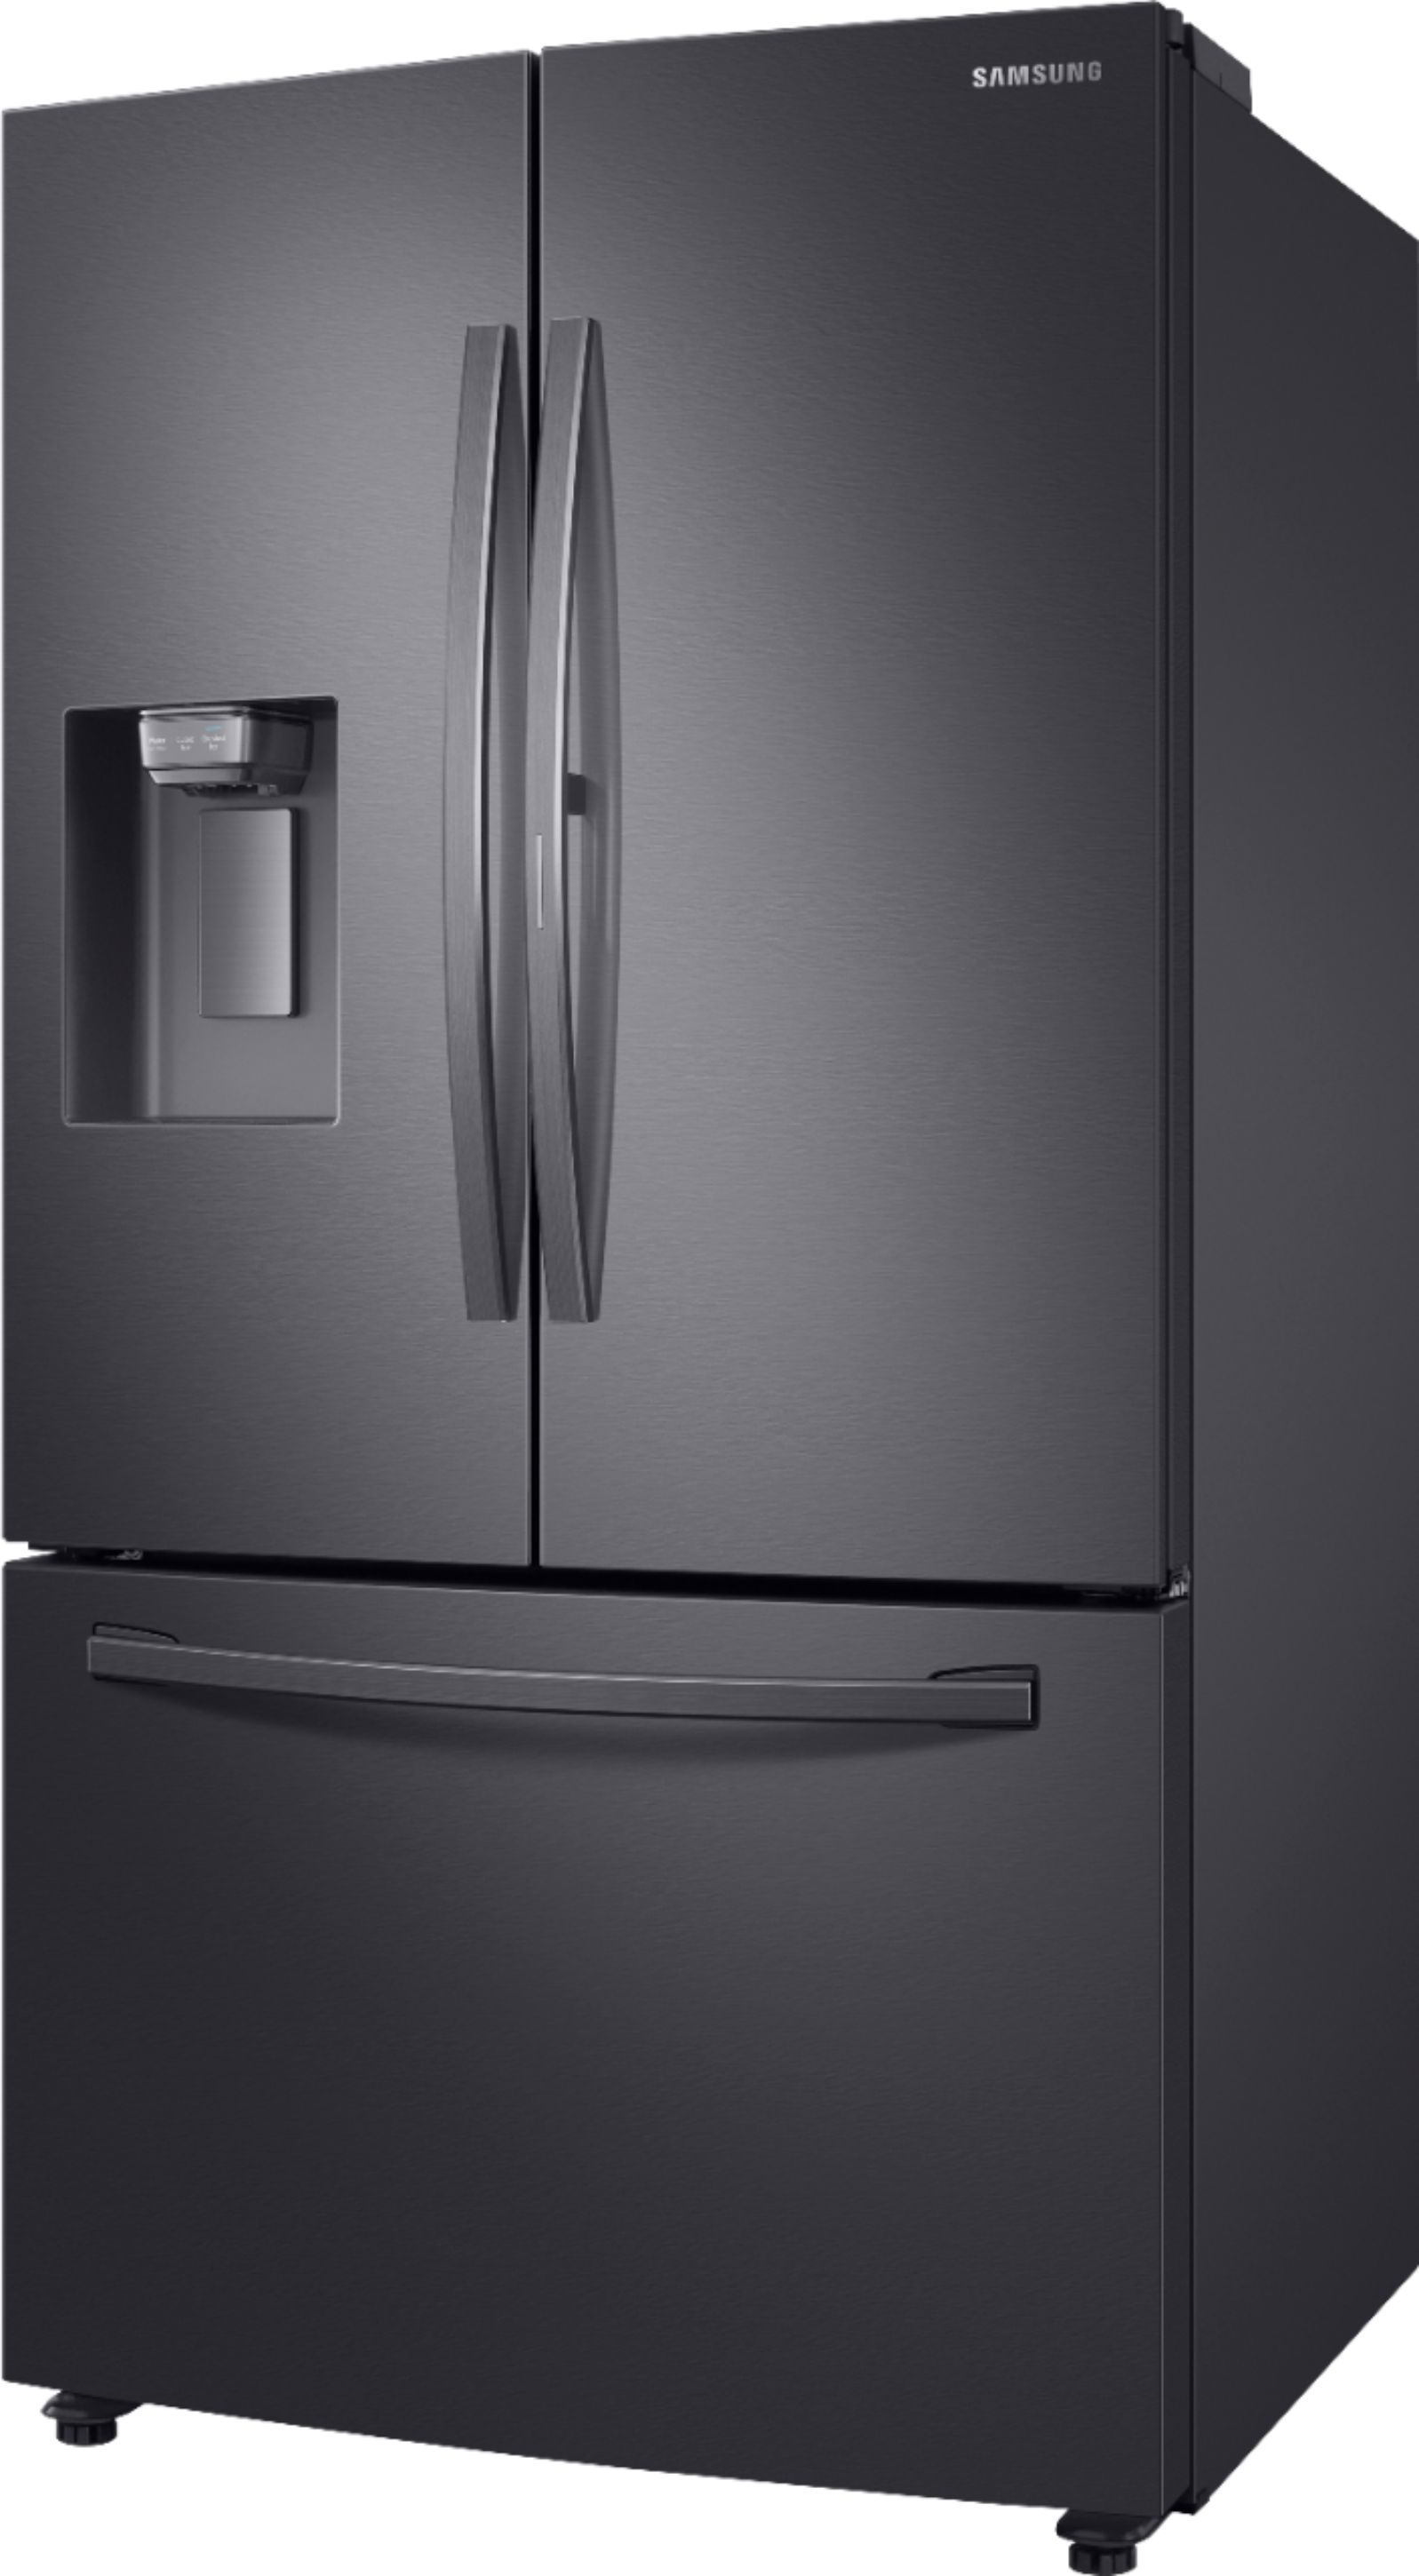 Left View: Samsung - 27.8 Cu. Ft. French Door  Fingerprint Resistant Refrigerator  with Food Showcase - Black stainless steel